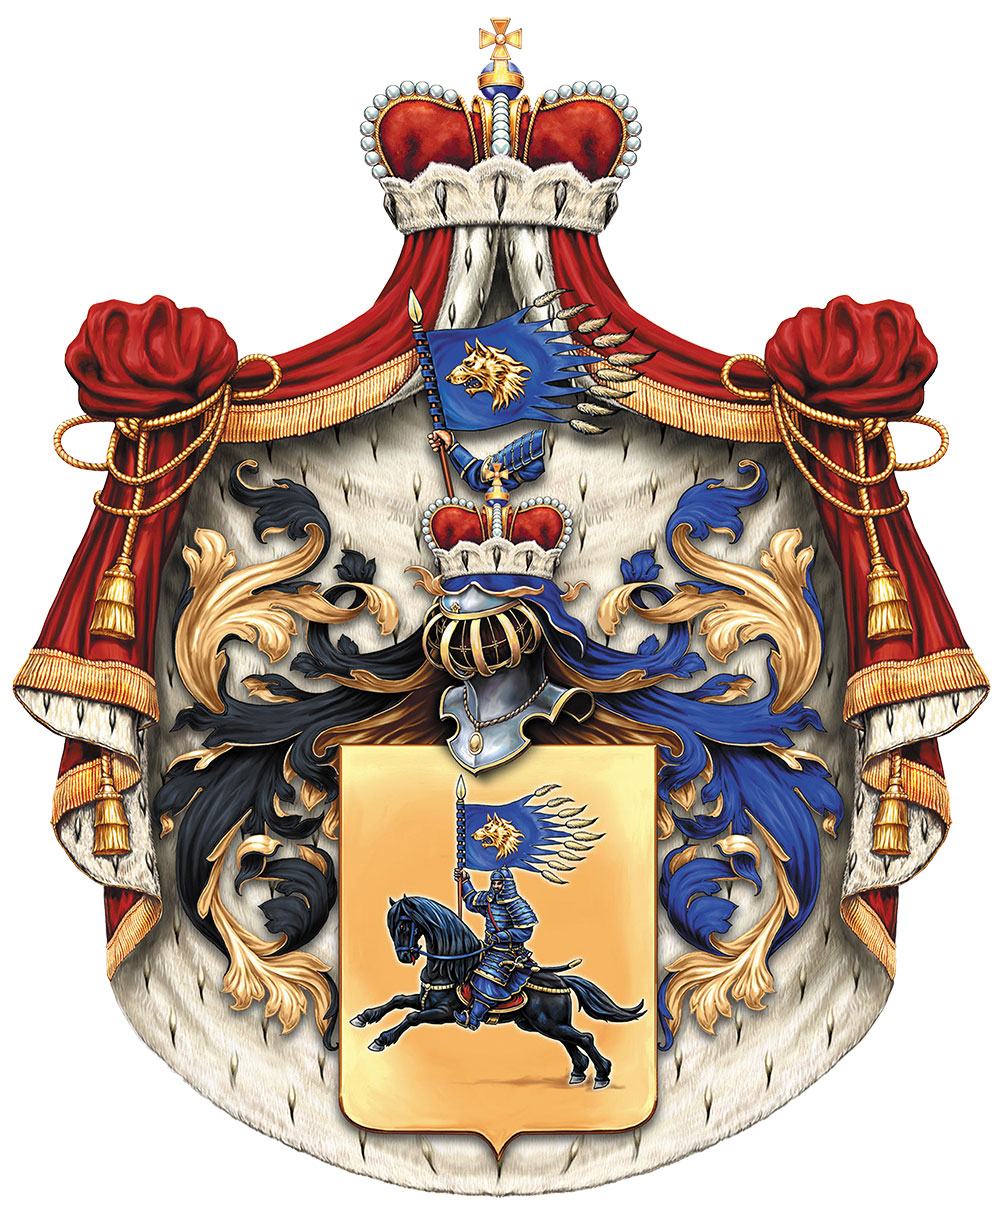 Family coat of arms of a modern aristocrat